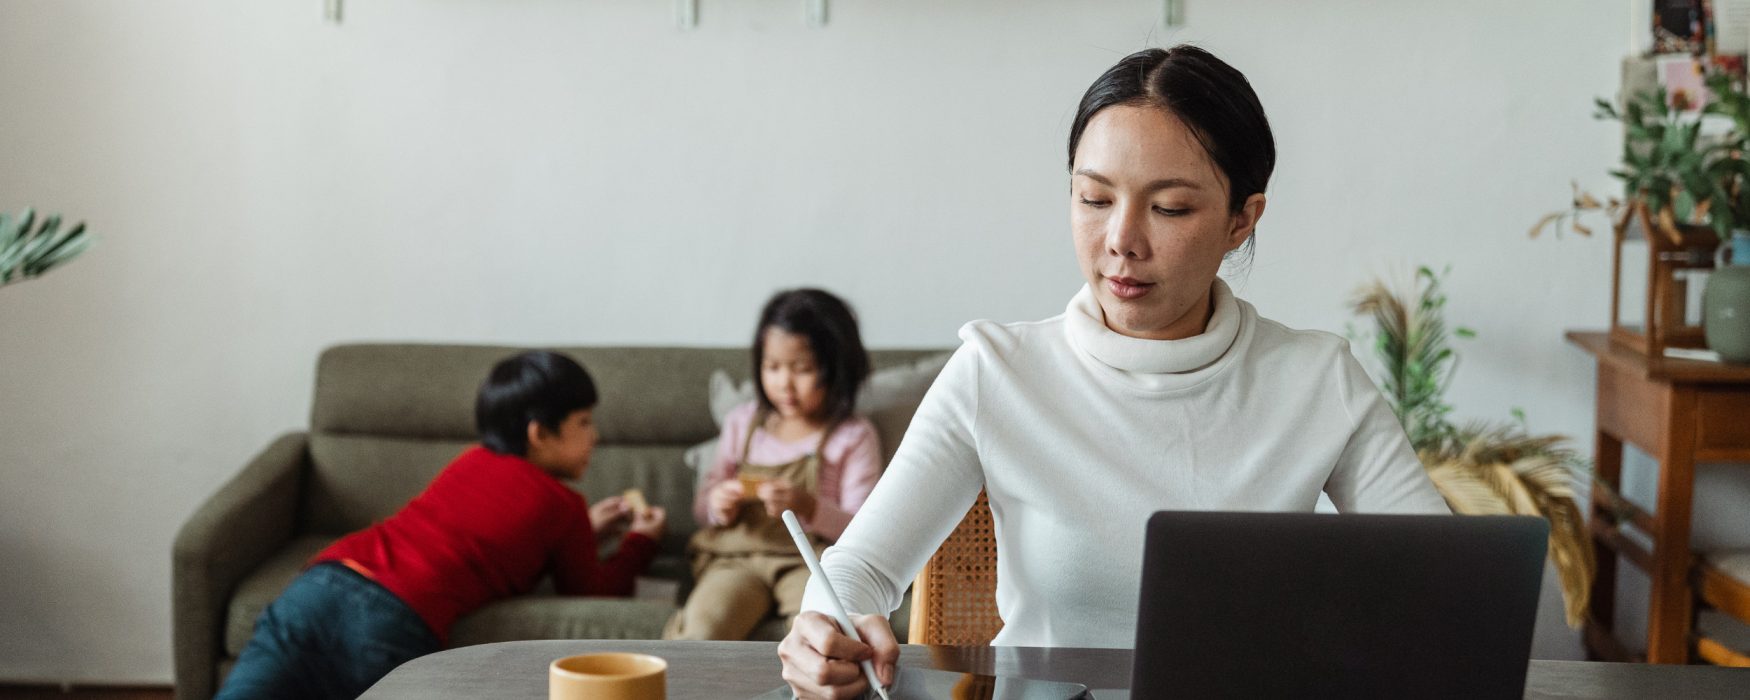 Woman working remotely with children in background